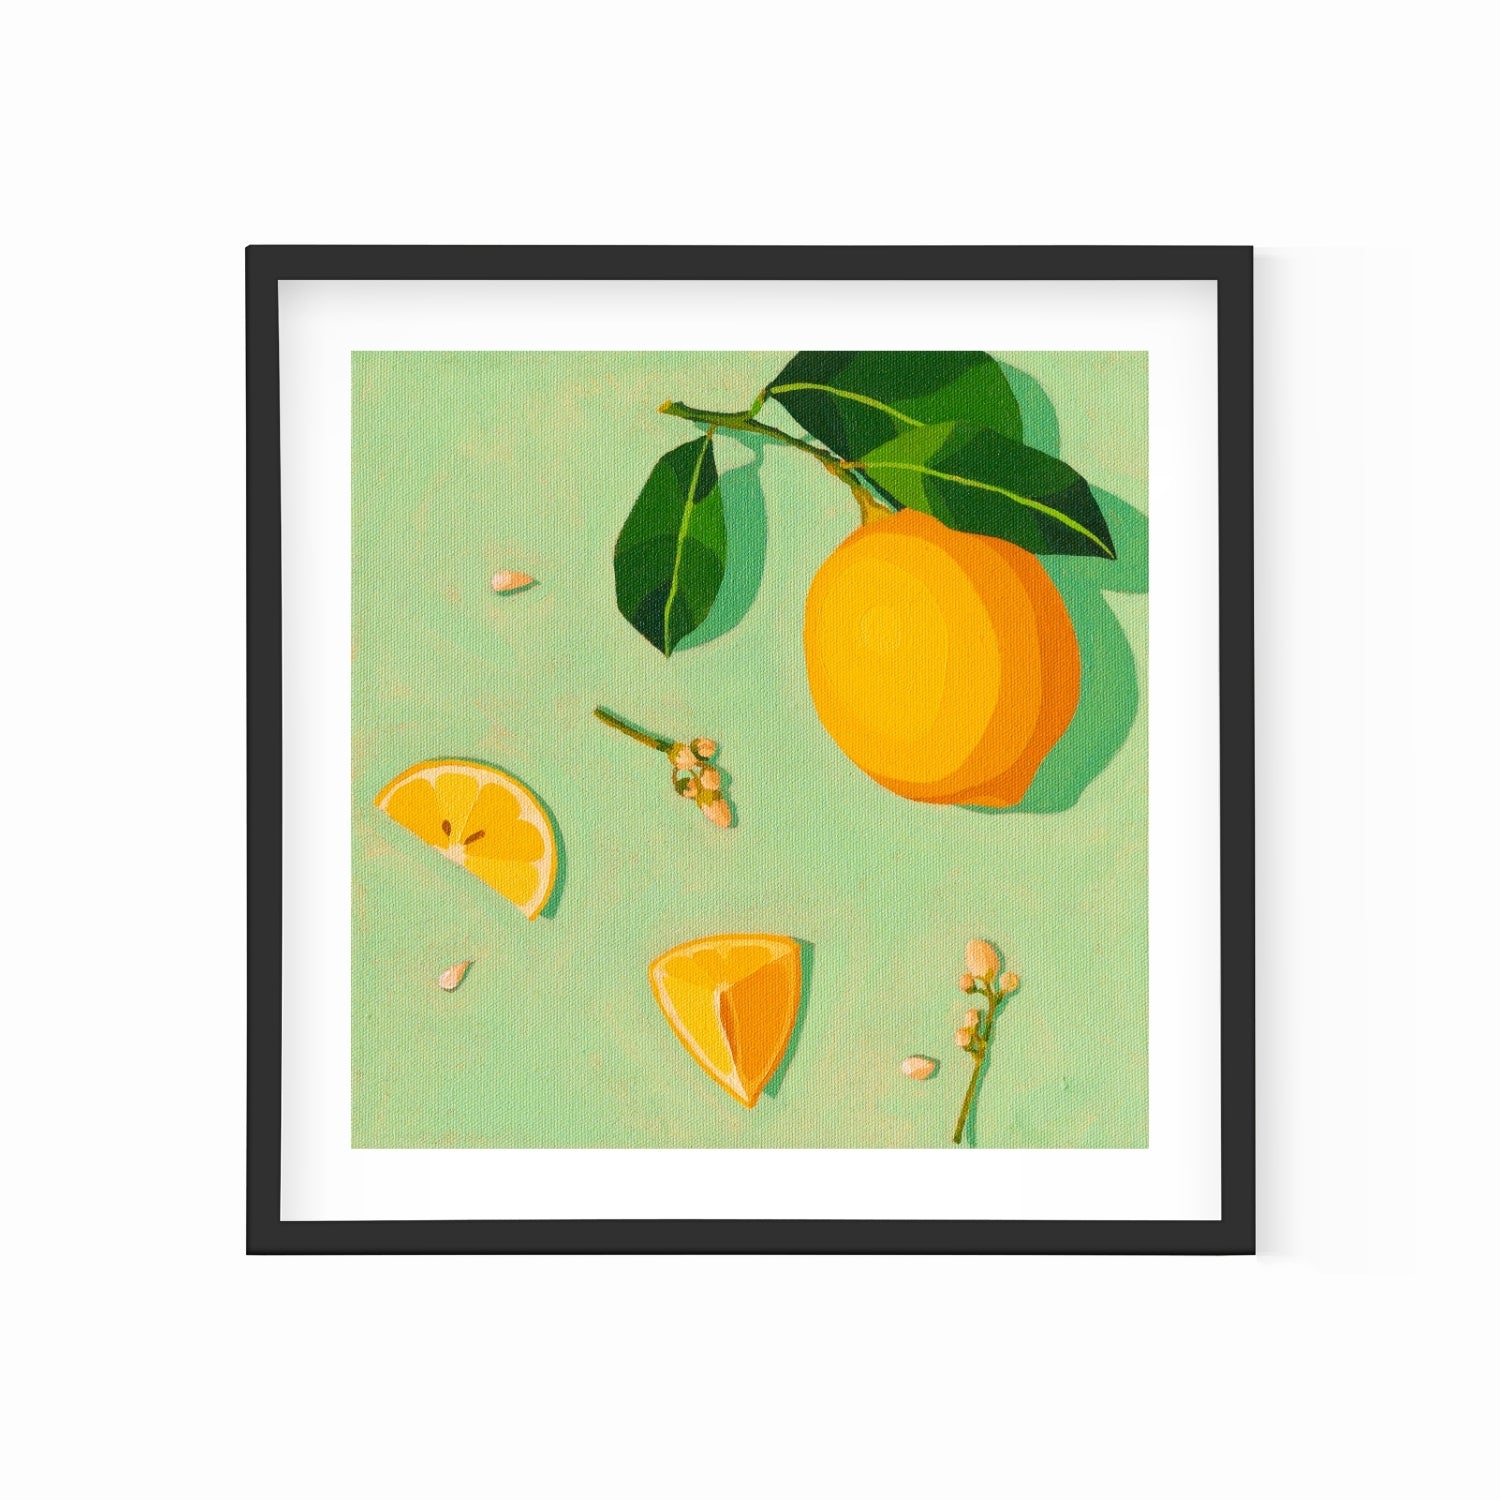 fine art print of a colorful and modern original oil painting of bright yellow lemons on aacqua green background with strong shadows